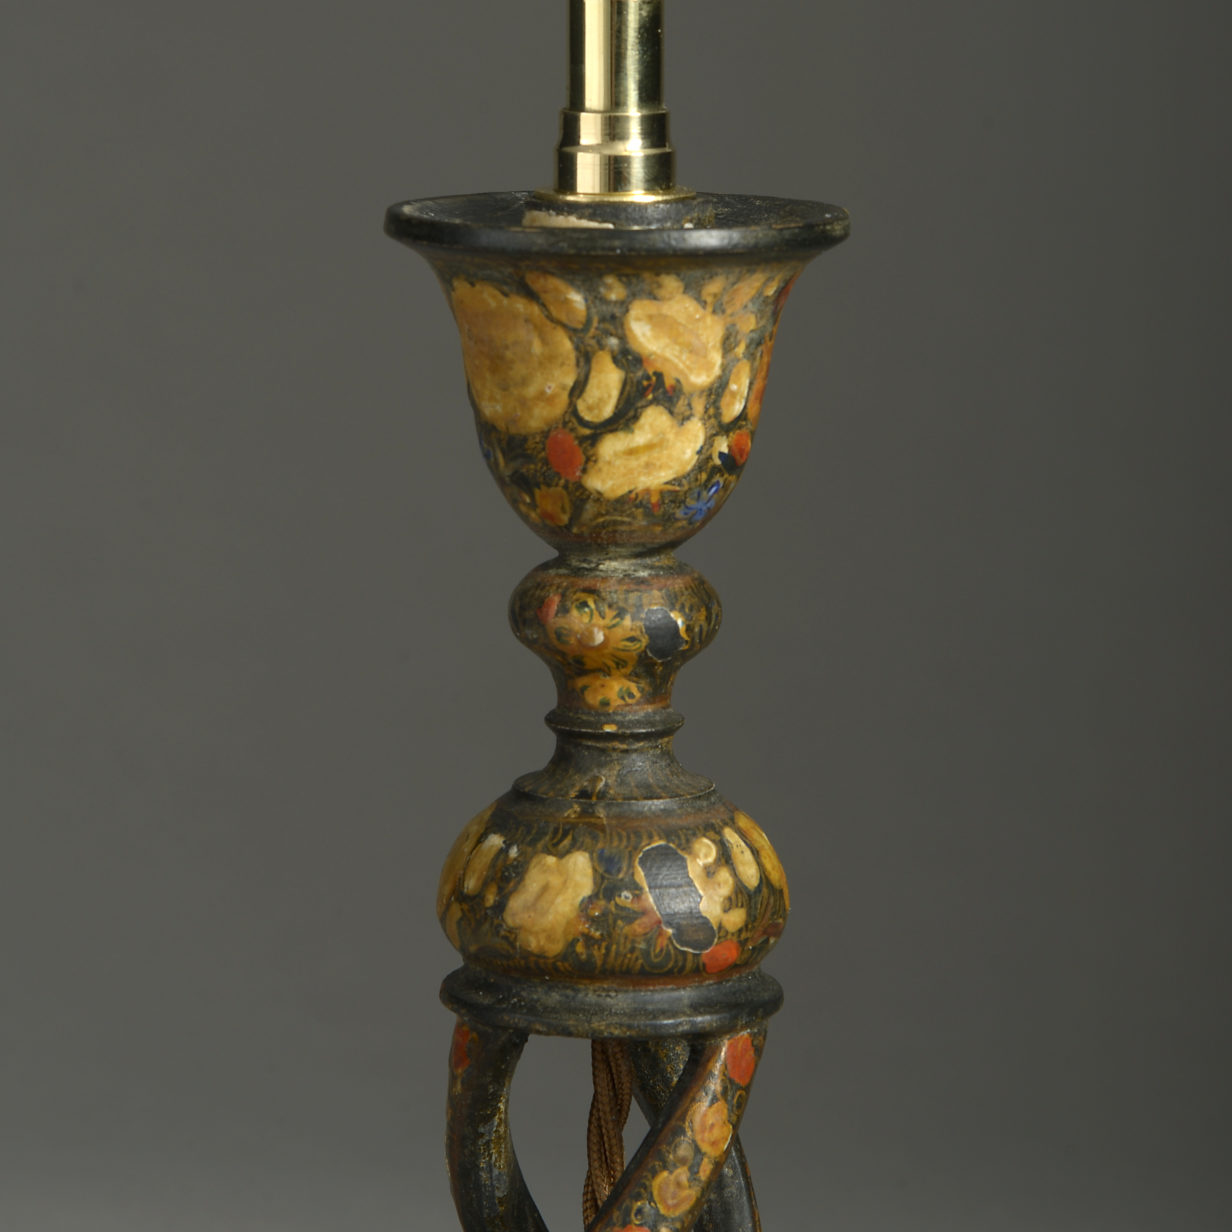 Early 20th century kashmiri lacquer lamp